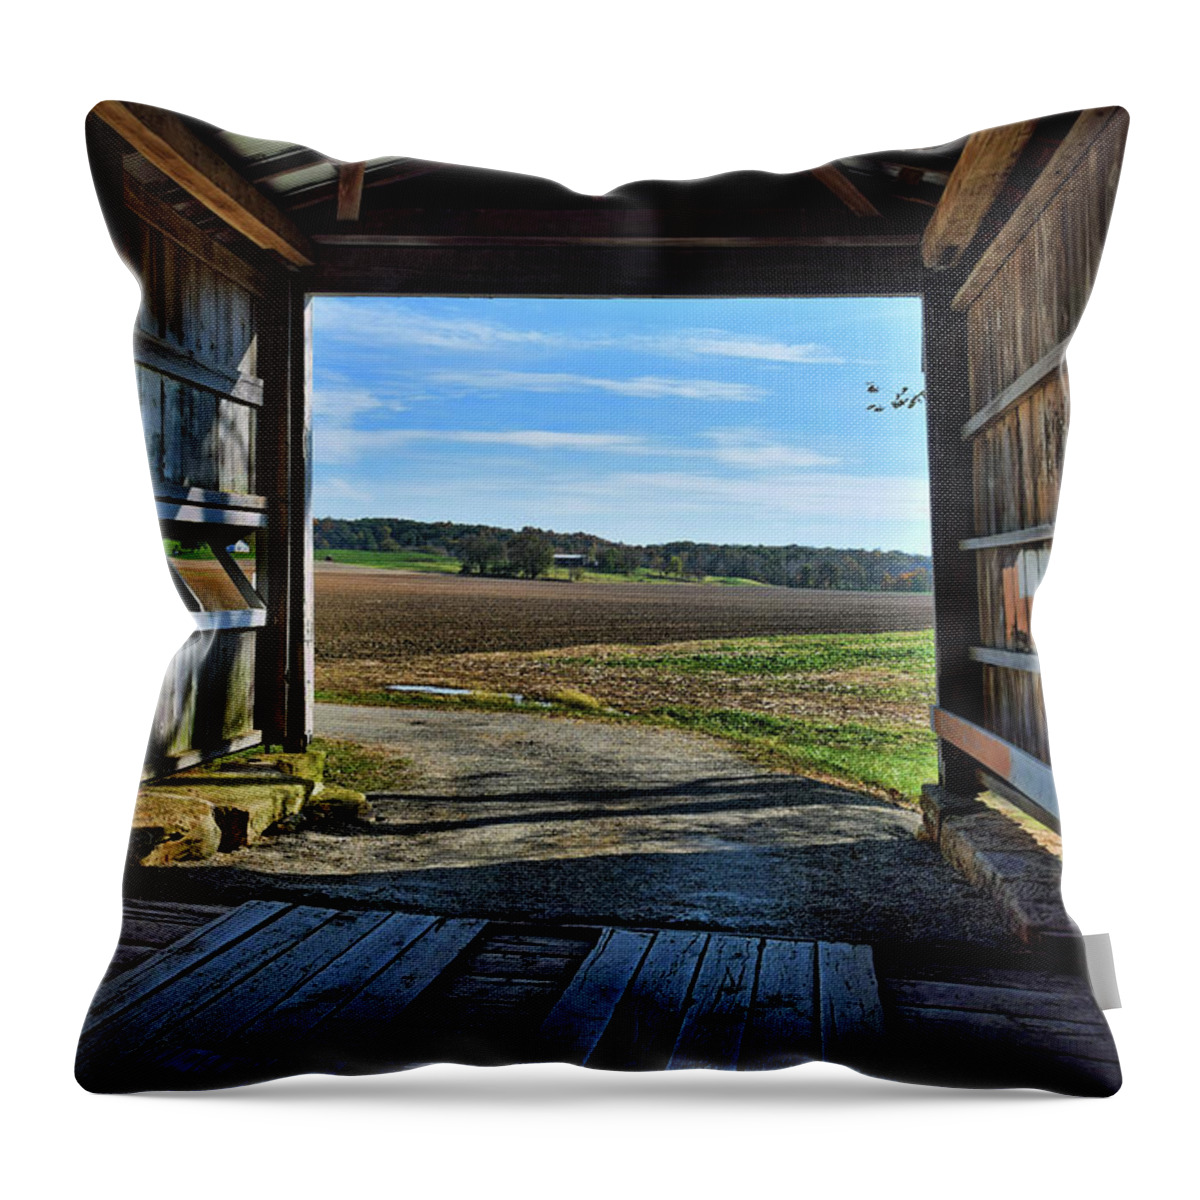 Crooks Throw Pillow featuring the photograph Crooks Covered Bridge 2 by Joanne Coyle